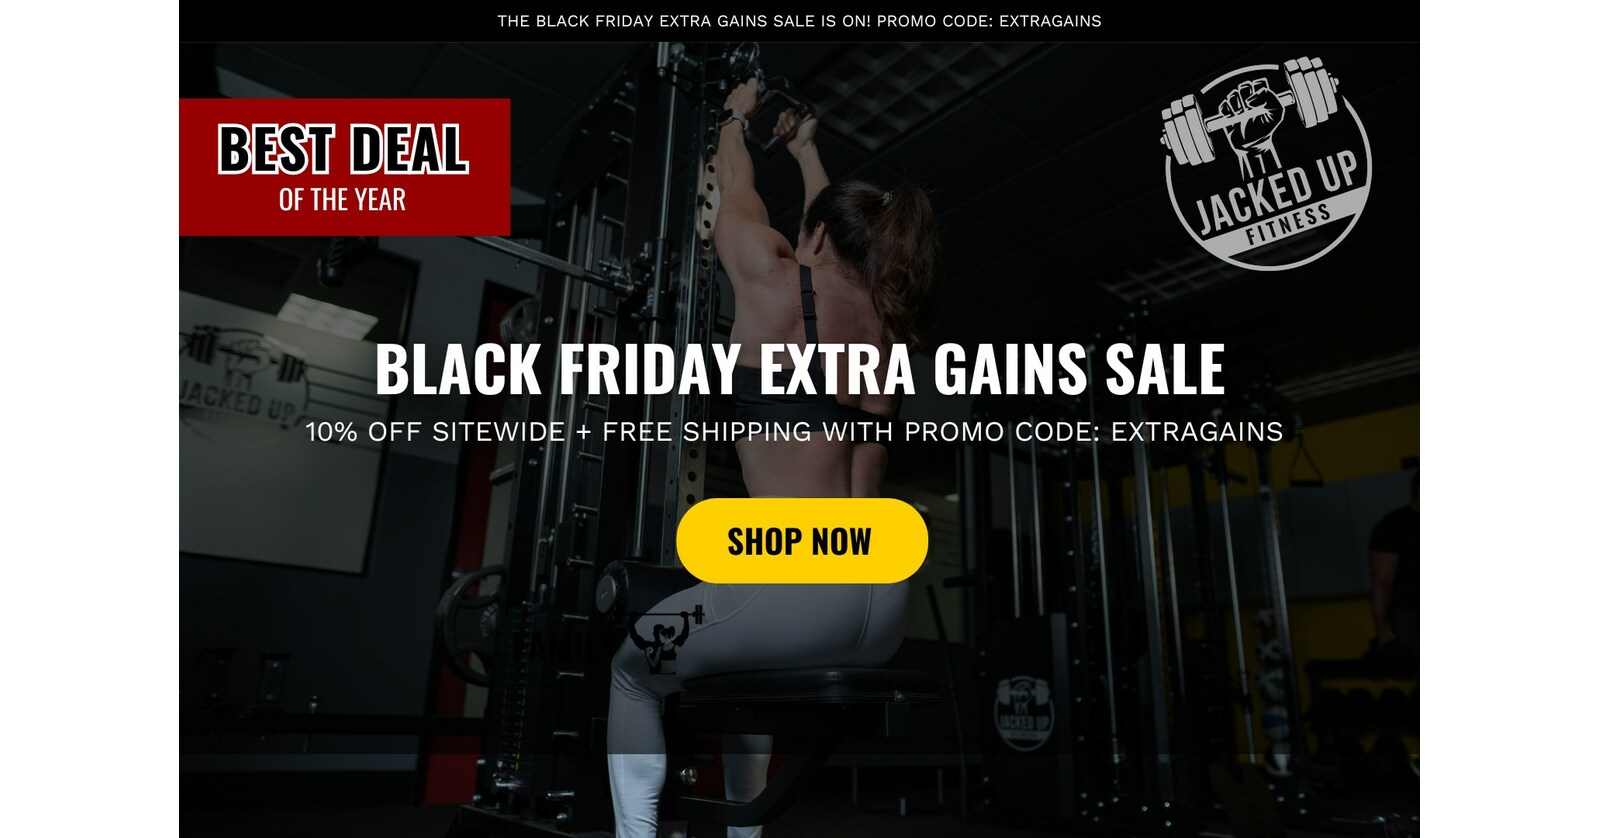 Jacked Up Fitness Announces Extra Gains Early Start of Black